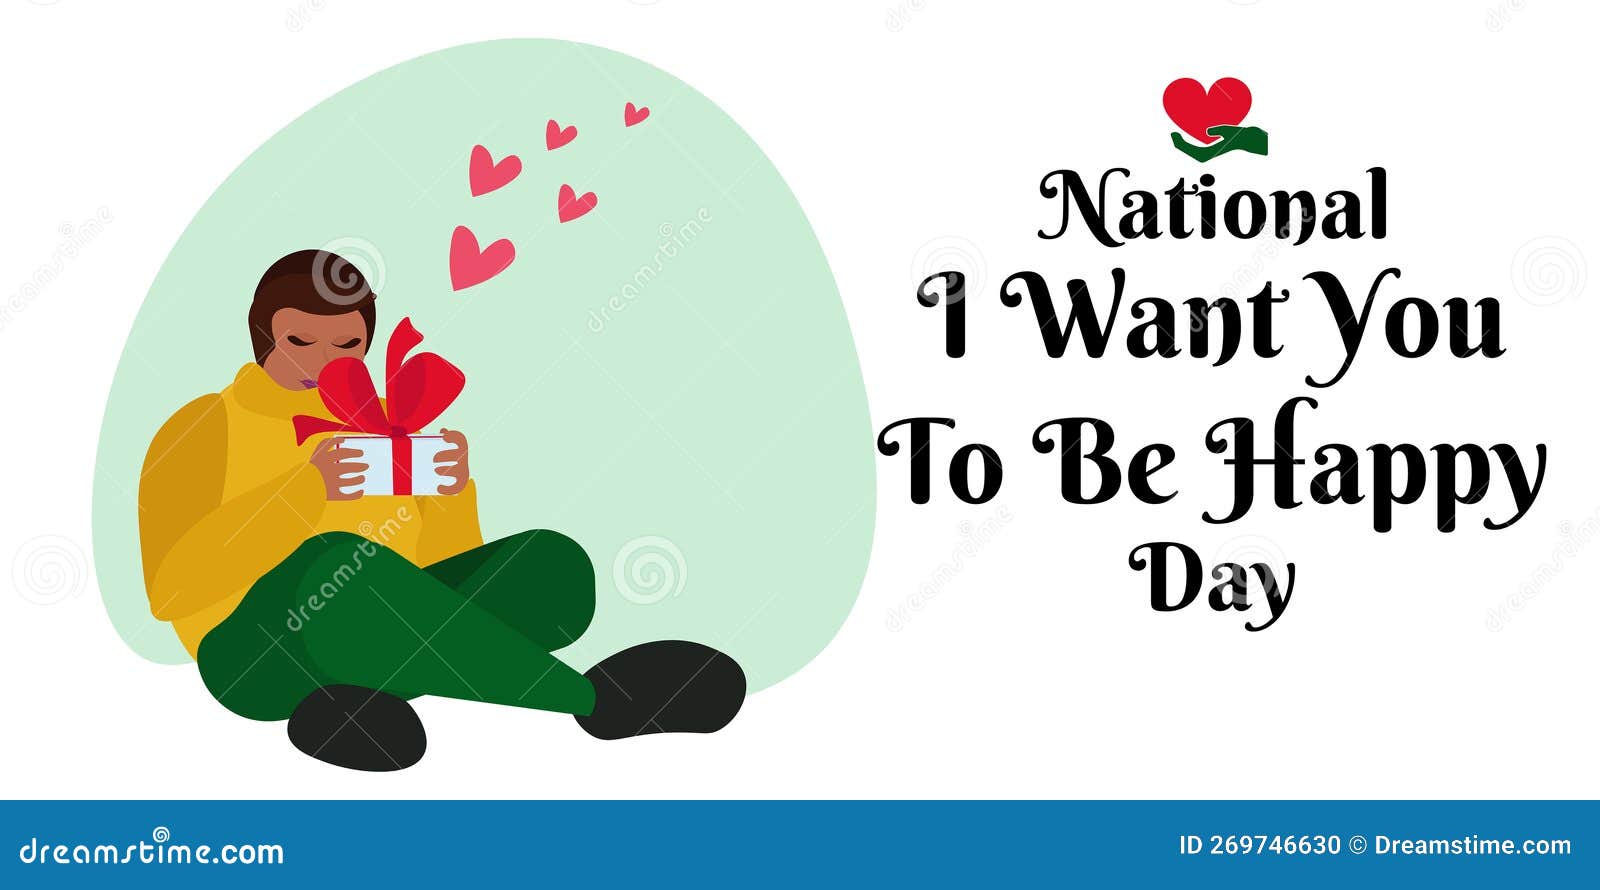 National I Want You To Be Happy Day, Idea for Poster, Banner, Flyer or